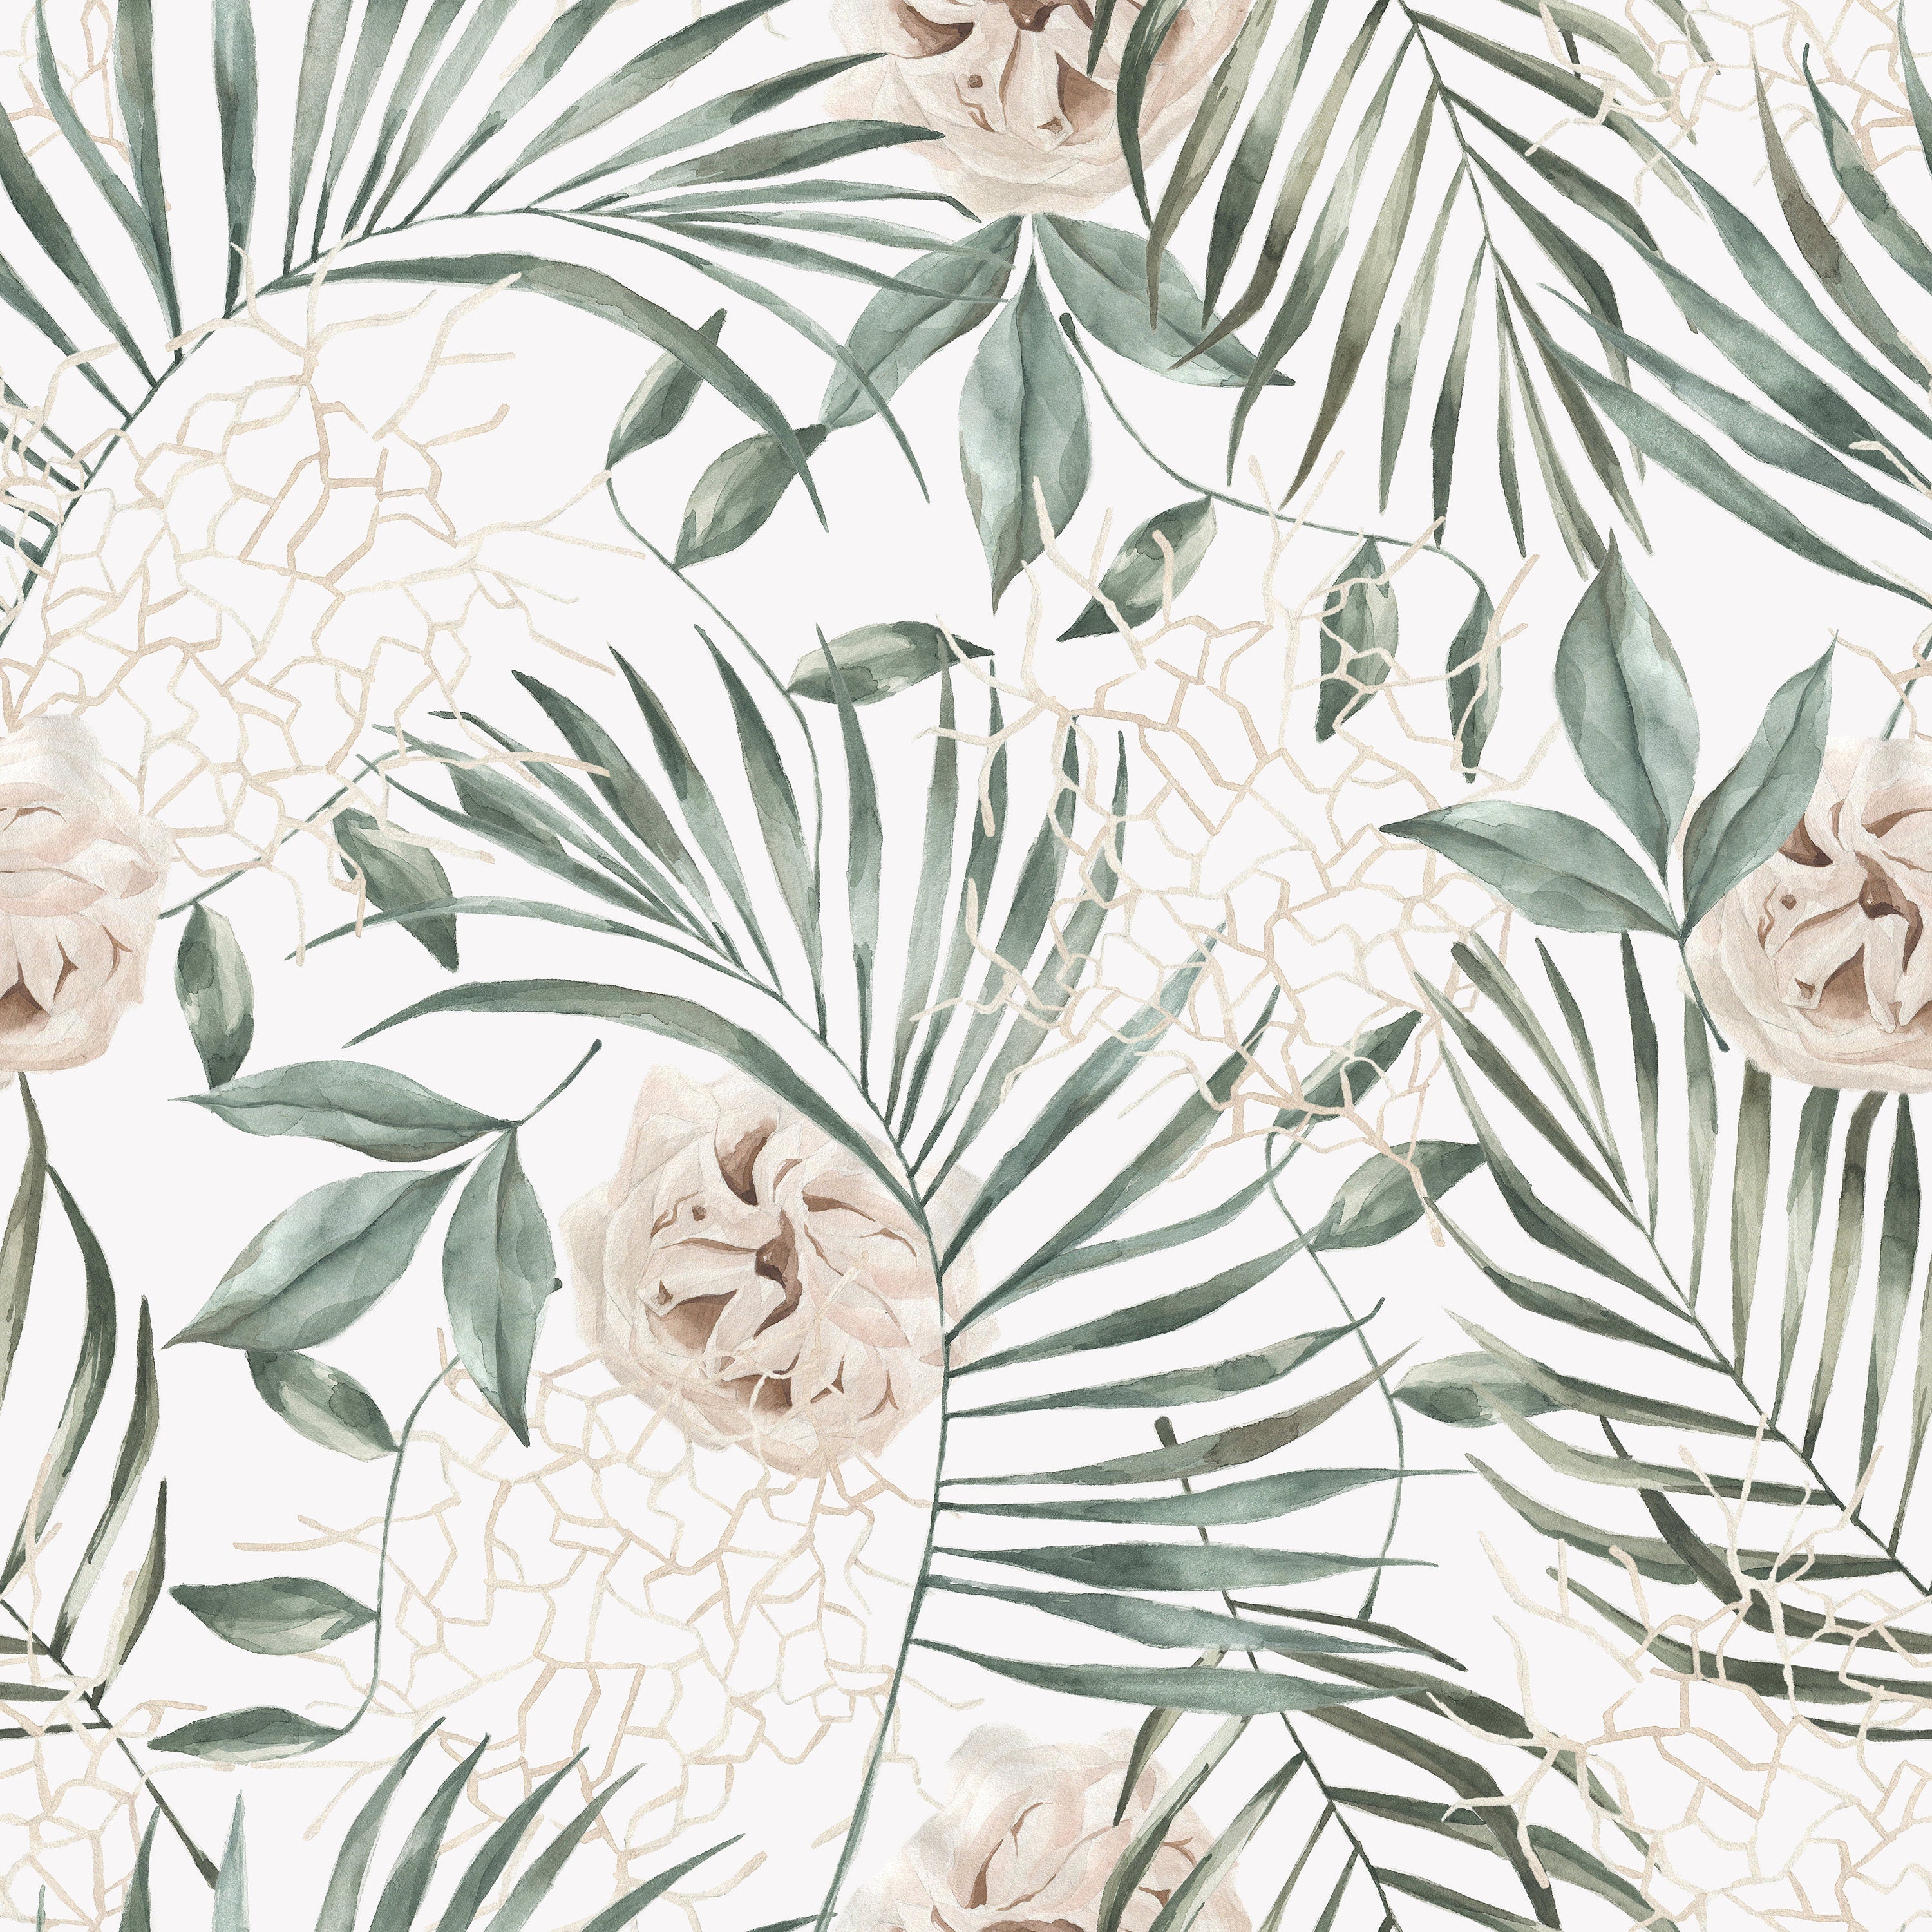 Large Tropical Palm Leaves Soft Floral Wallpaper | Wallpaper Peel and Stick | Removable Wallpaper | Wall Paper Peel And Stick 3441 - JamesAndColors